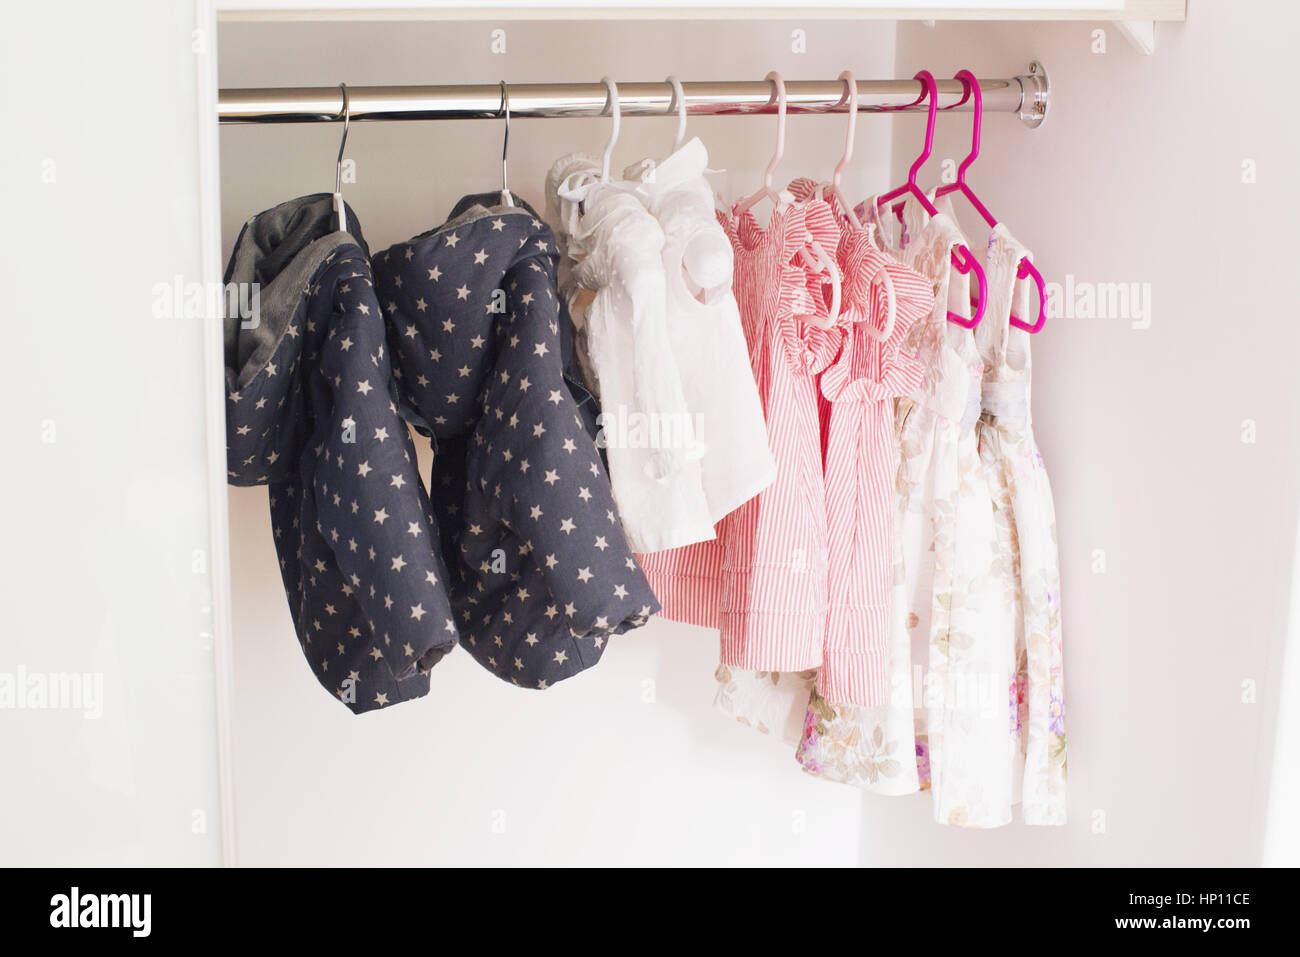 https://c8.alamy.com/comp/HP11CE/baby-clothes-hanging-in-closet-HP11CE.jpg